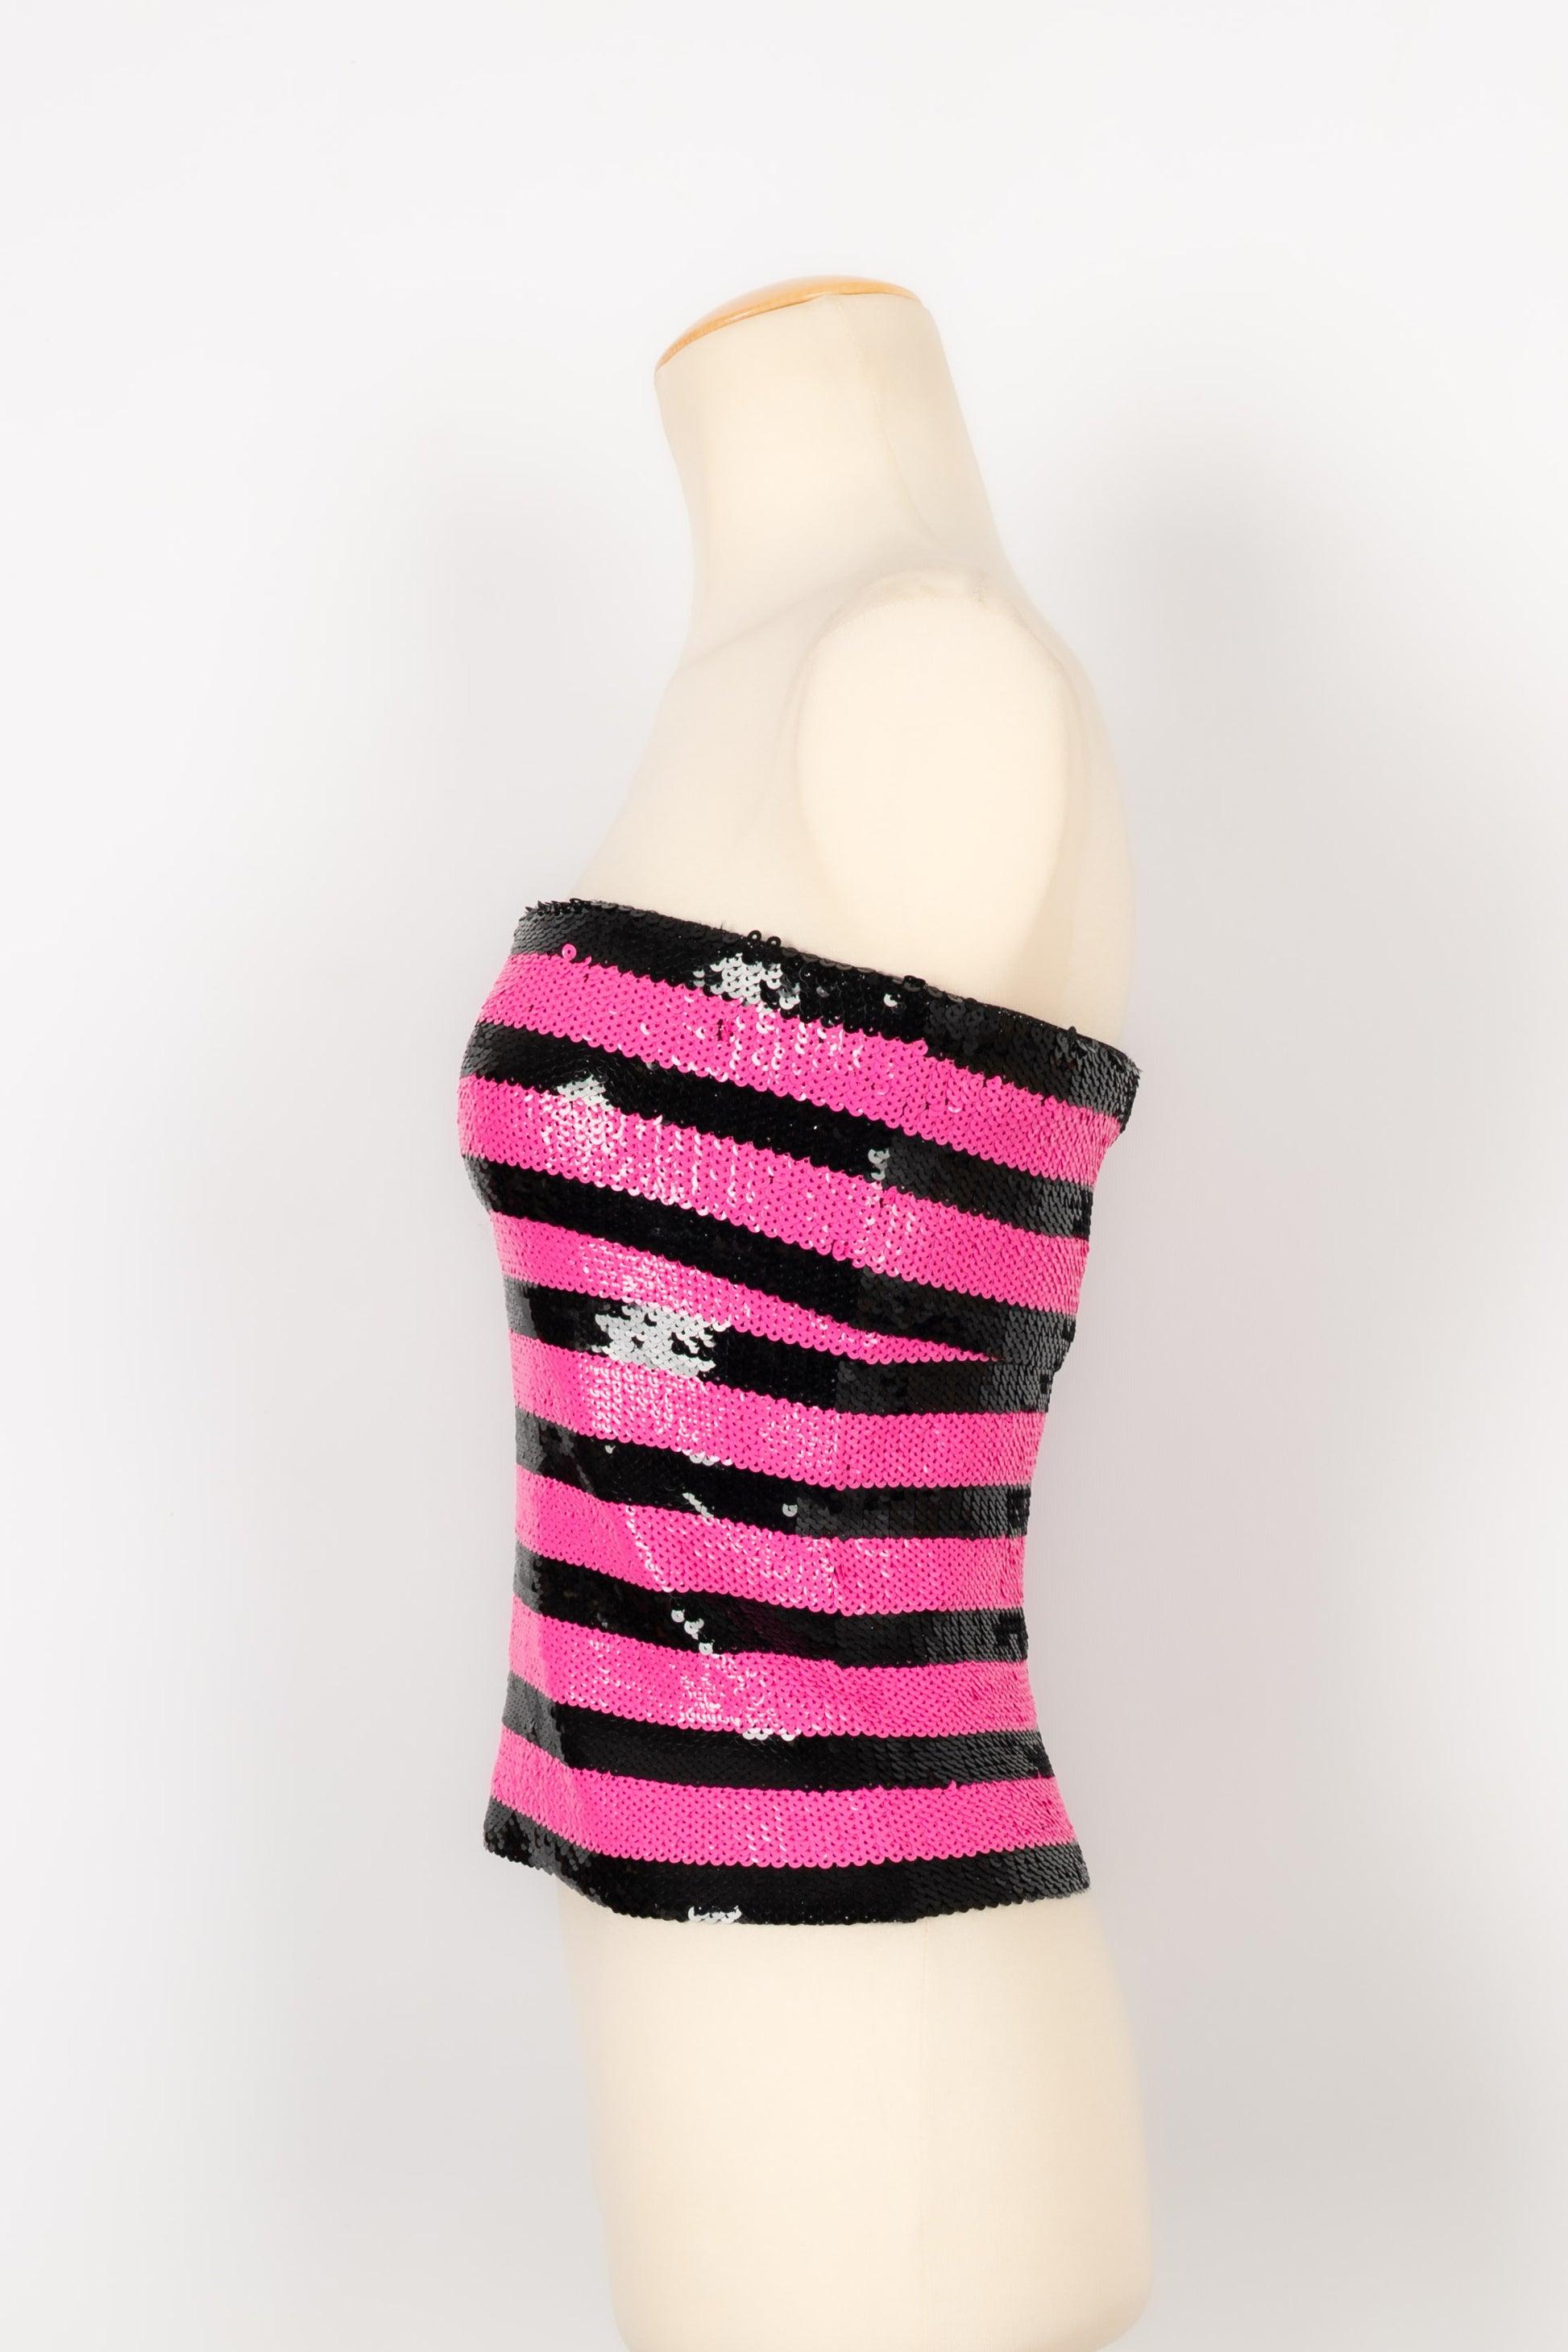 Yves Saint Laurent -  (Made in Italy) Black and pink sequinned bustier top. Size XS. 2013 Collection.

Additional information:
Condition: Very good condition
Dimensions: Chest: 30 cm - Length: 31 cm

Seller Reference: FH159 
